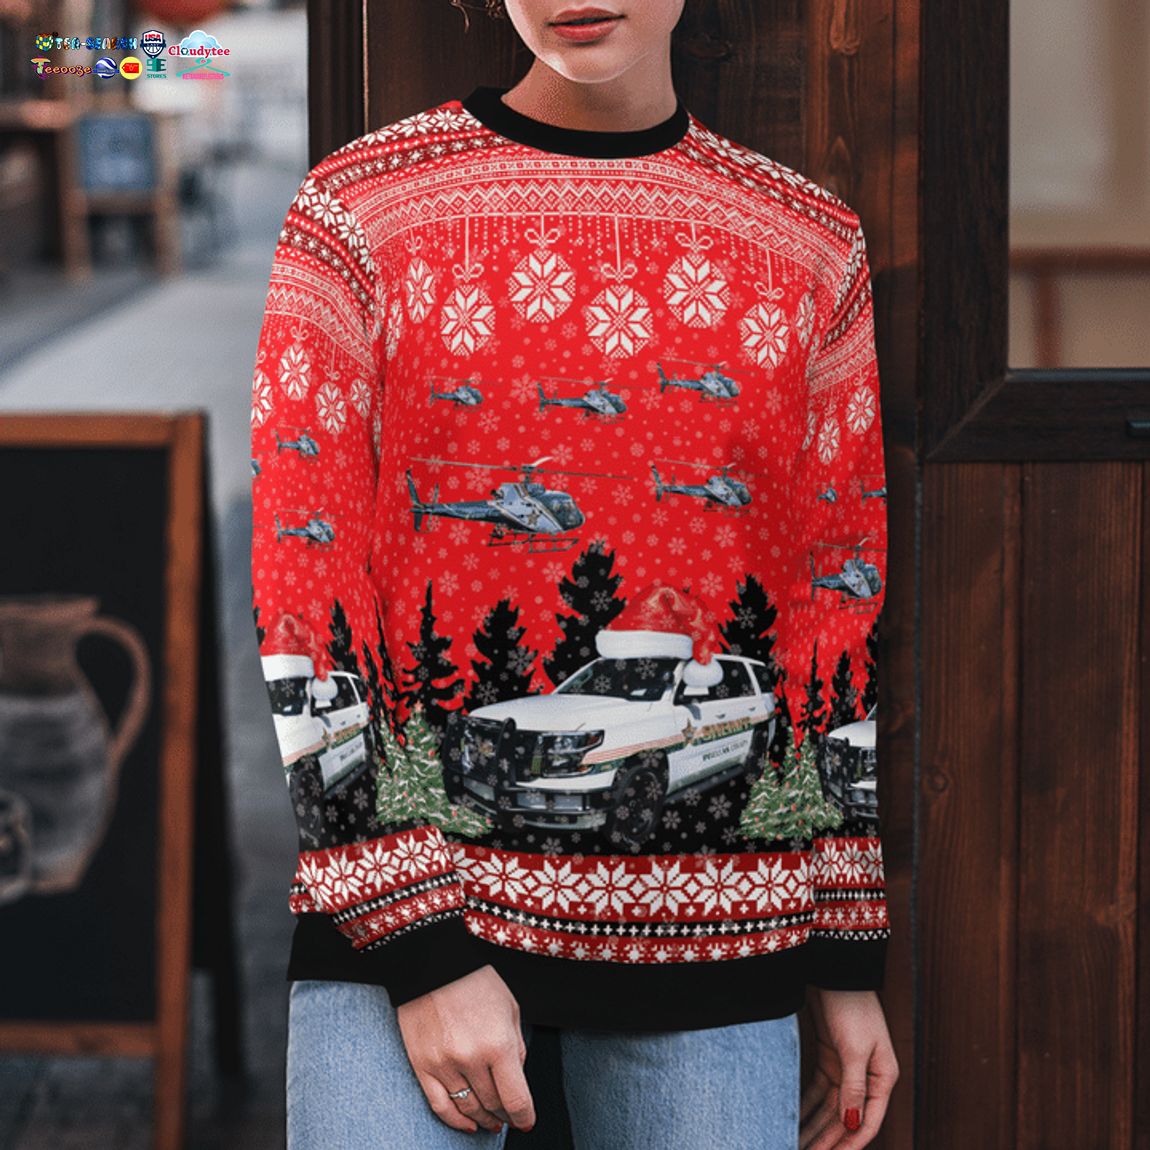 Florida Pinellas County Office Chevy Tahoe And Helicopter 3D Christmas Sweater